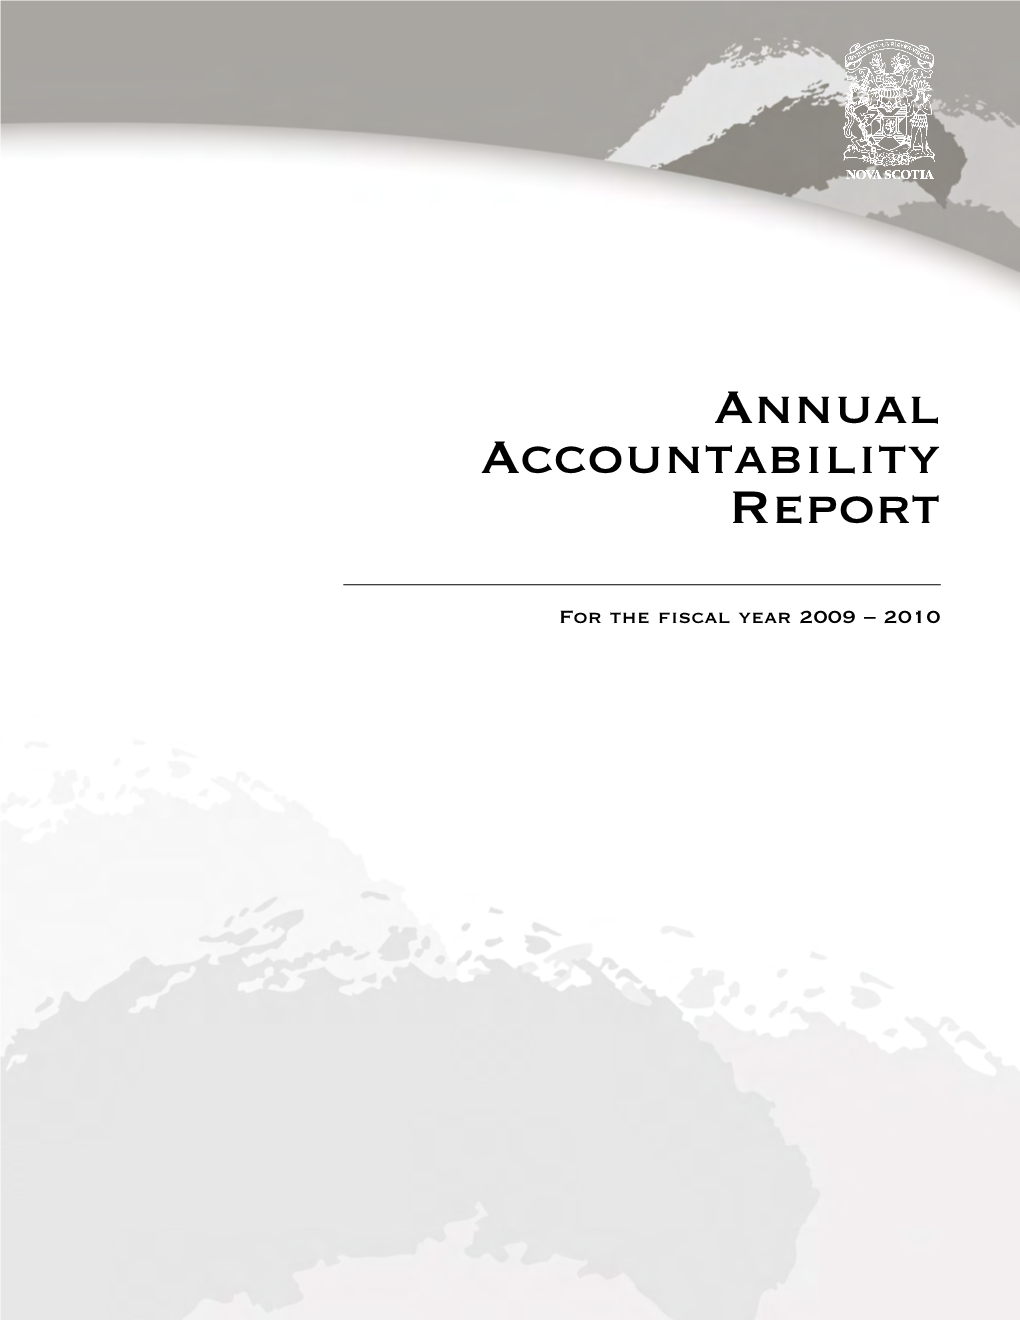 Accountbility Report